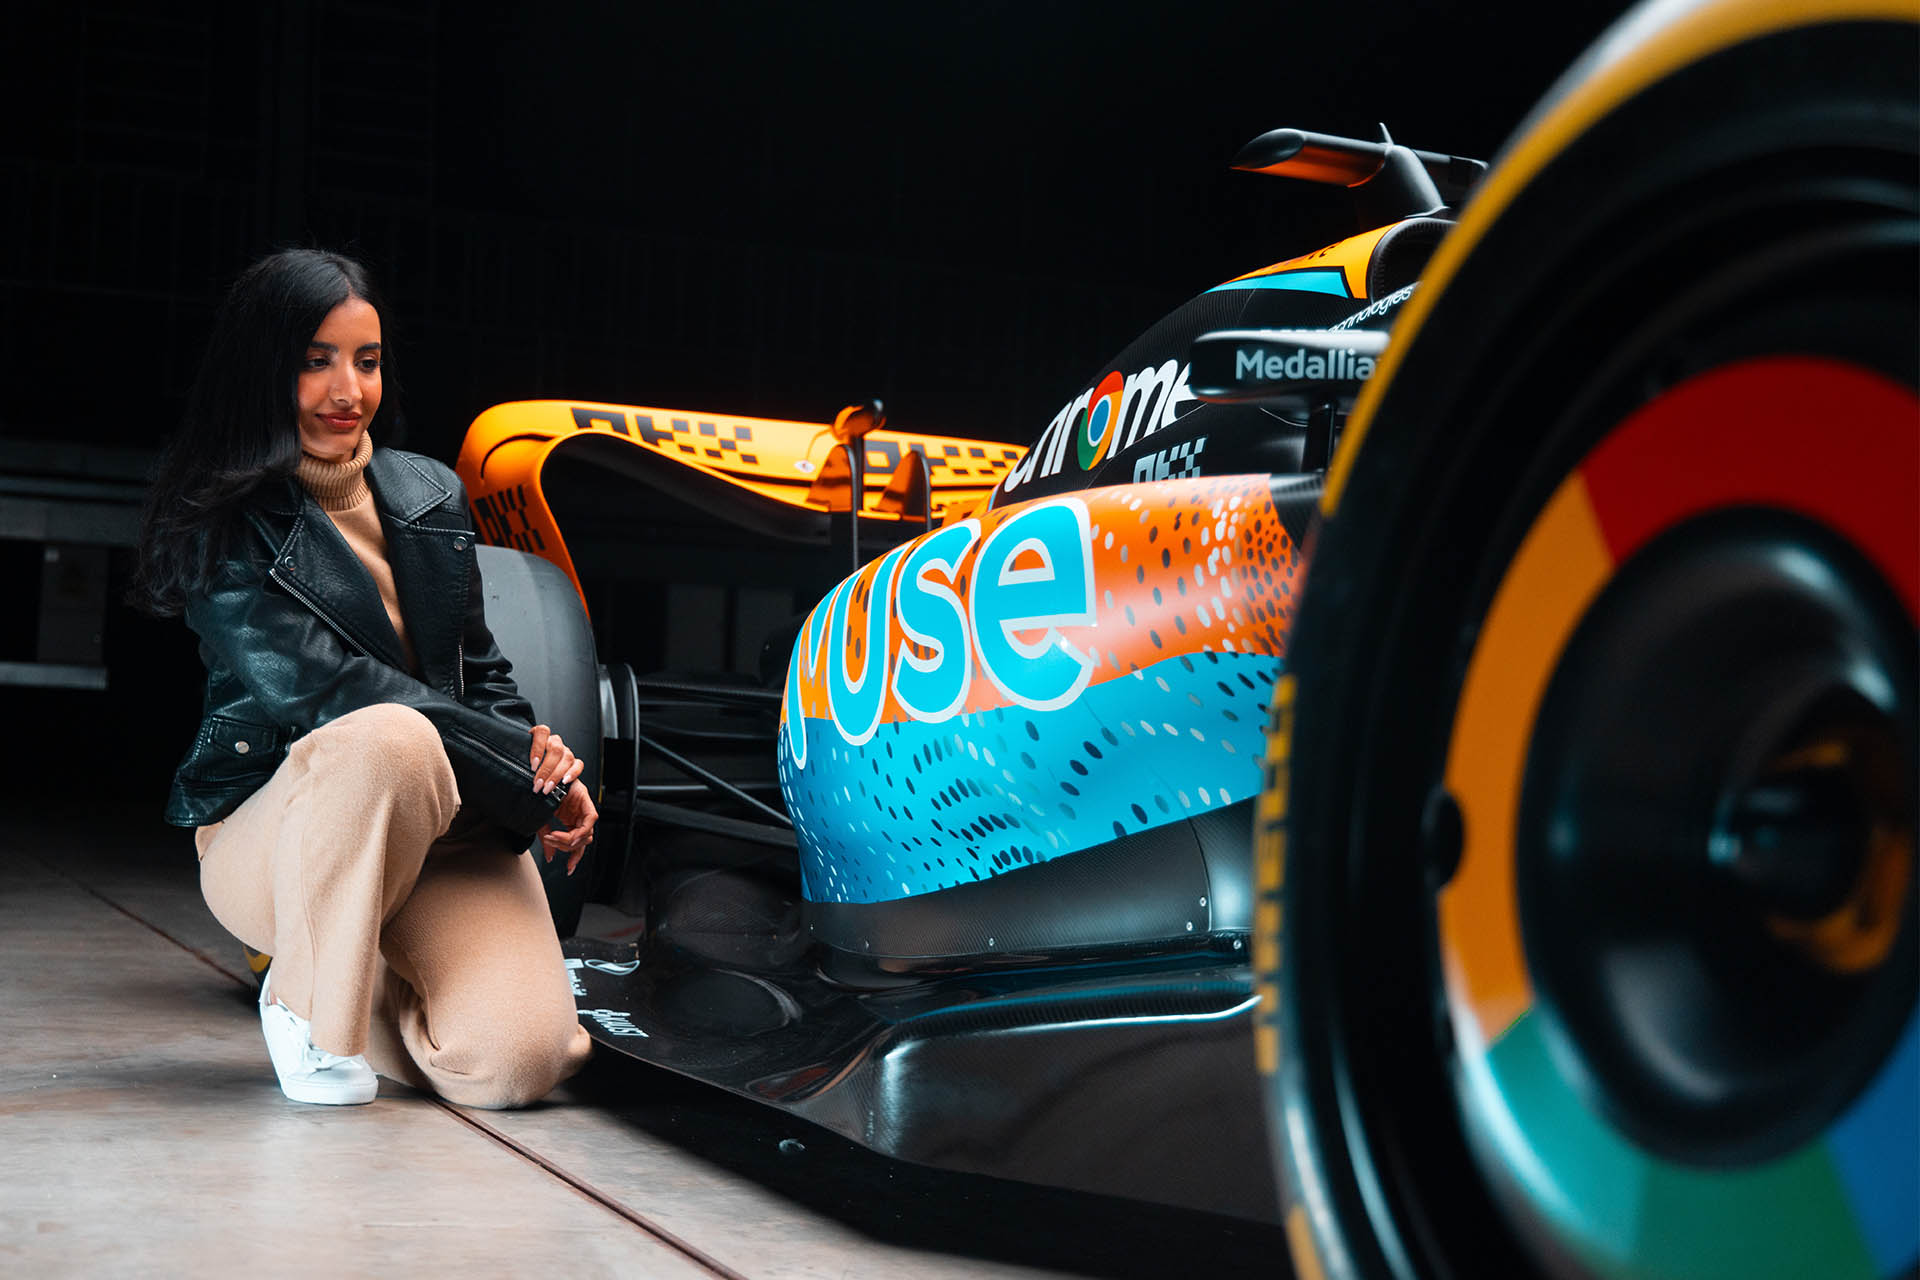 2023 F1 cars and liveries, McLaren unveils fresh Abu Dhabi look